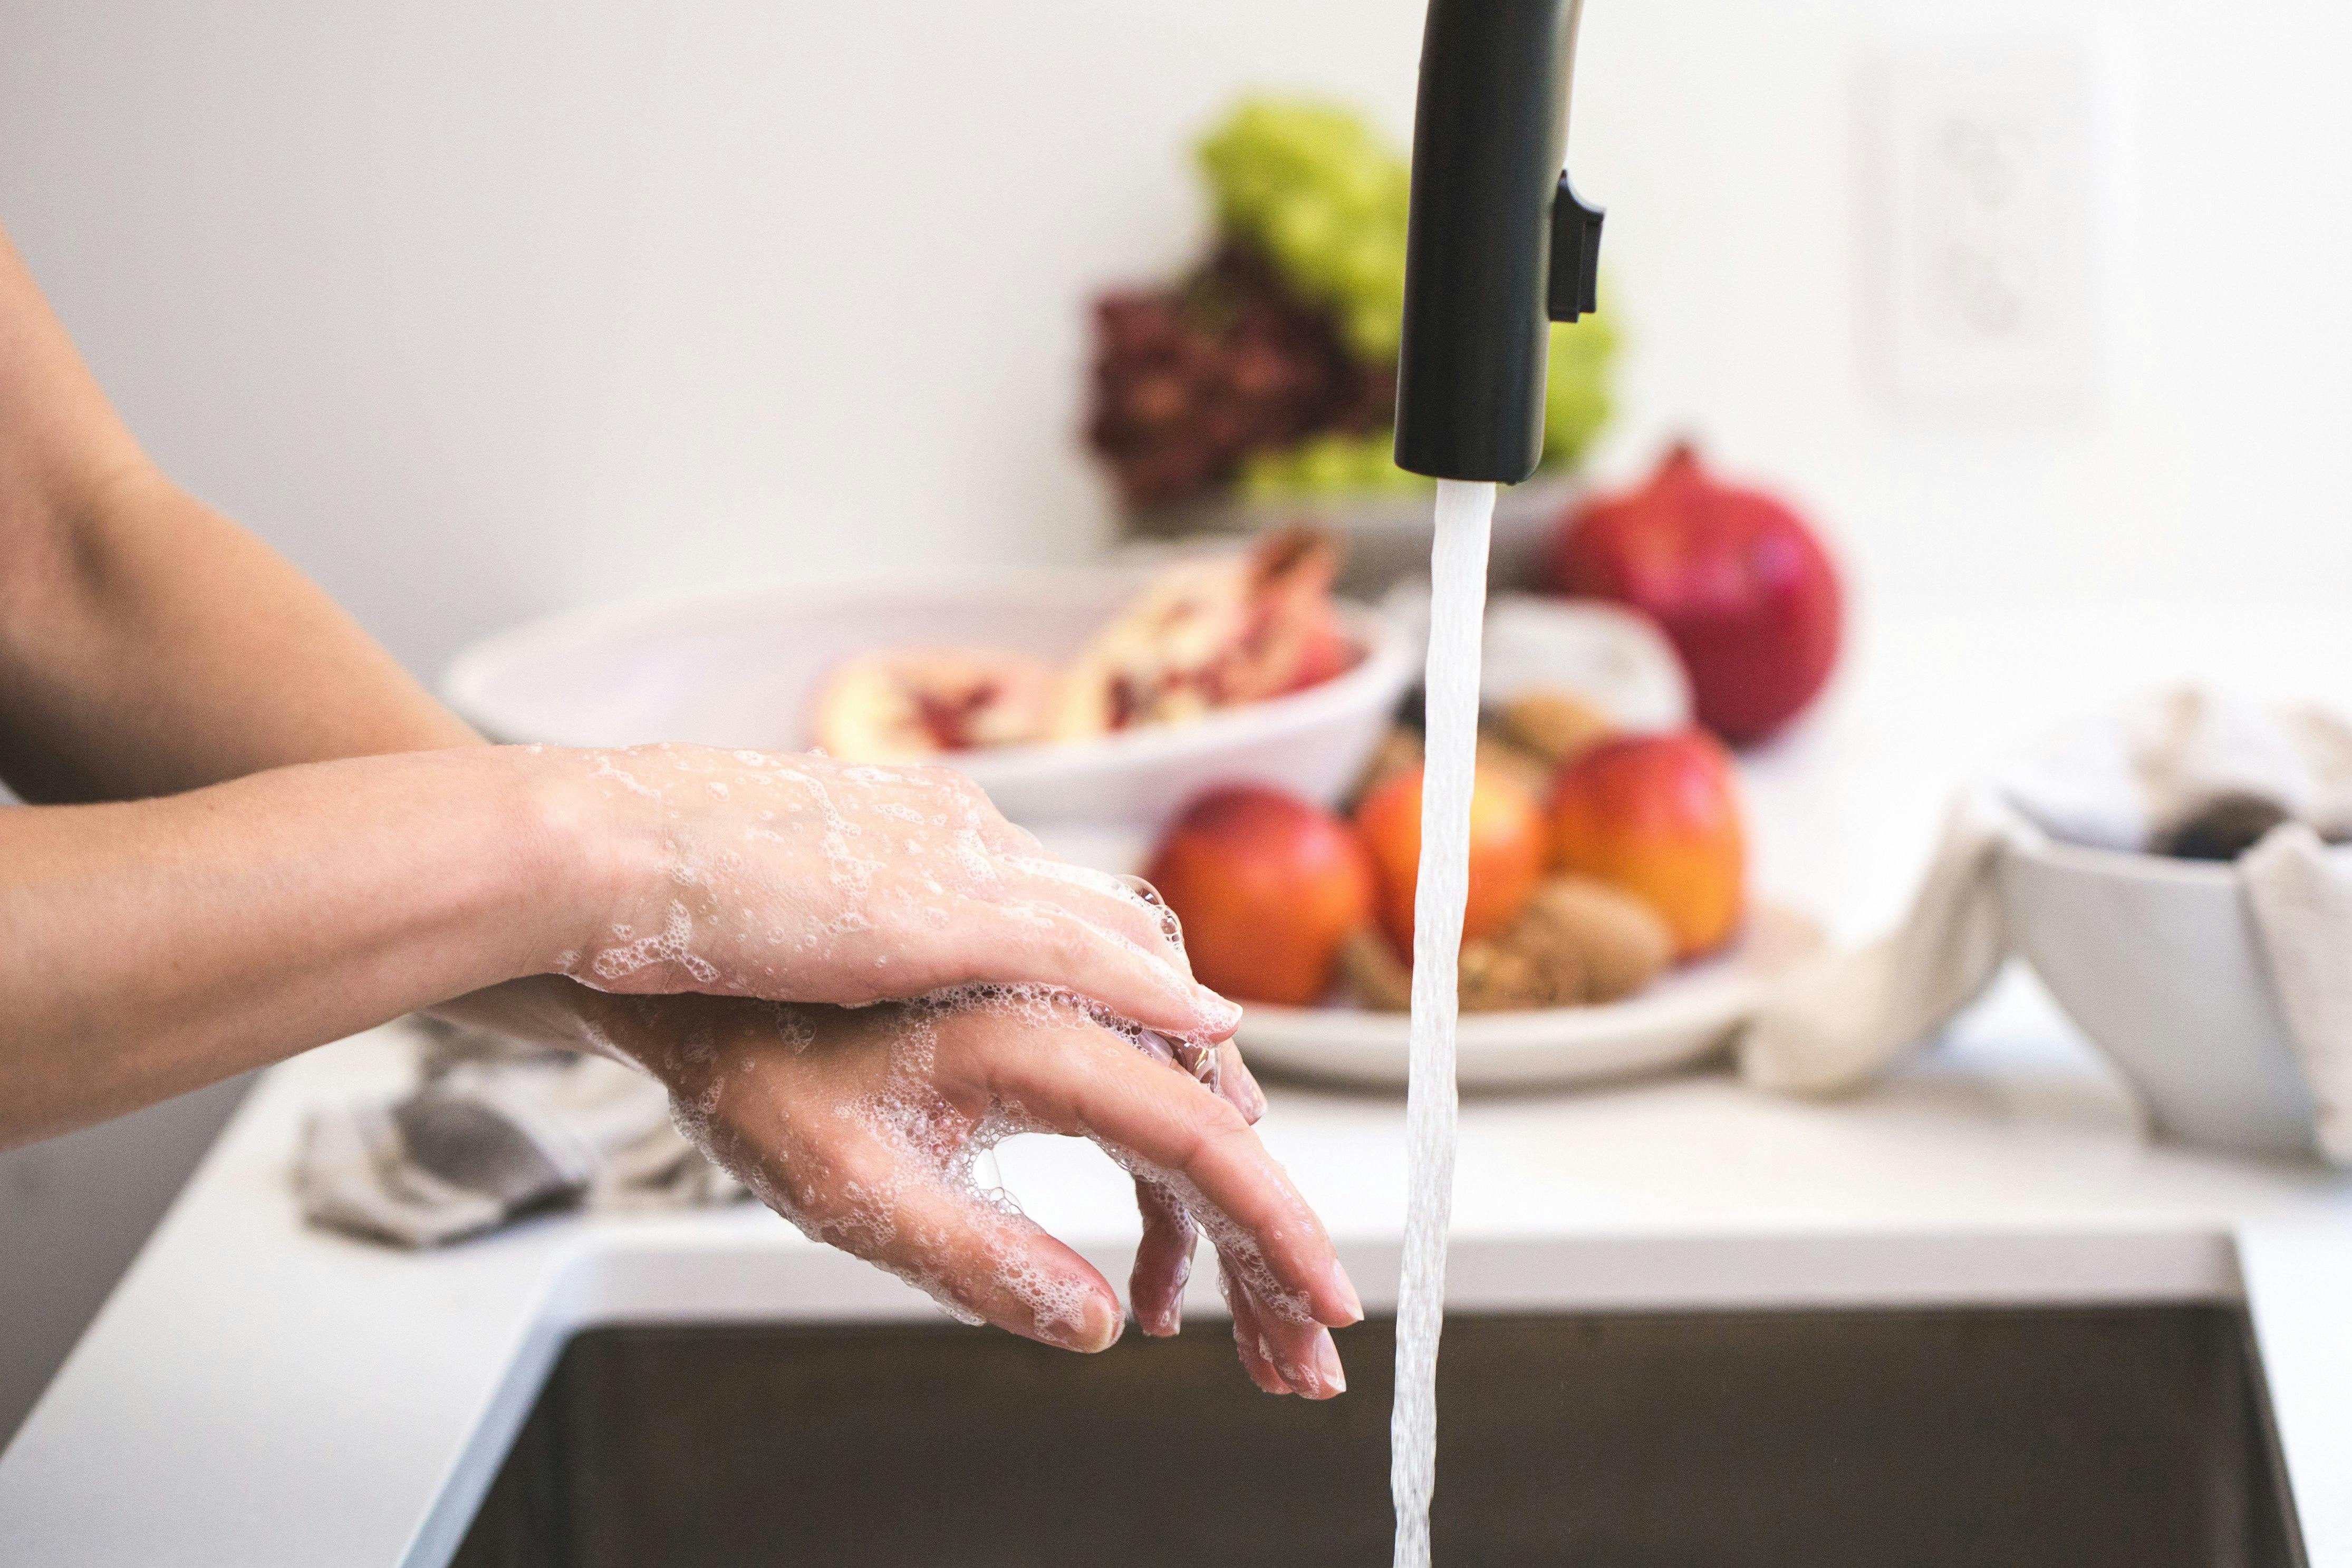 Person Washing Hands · Free Stock Photo